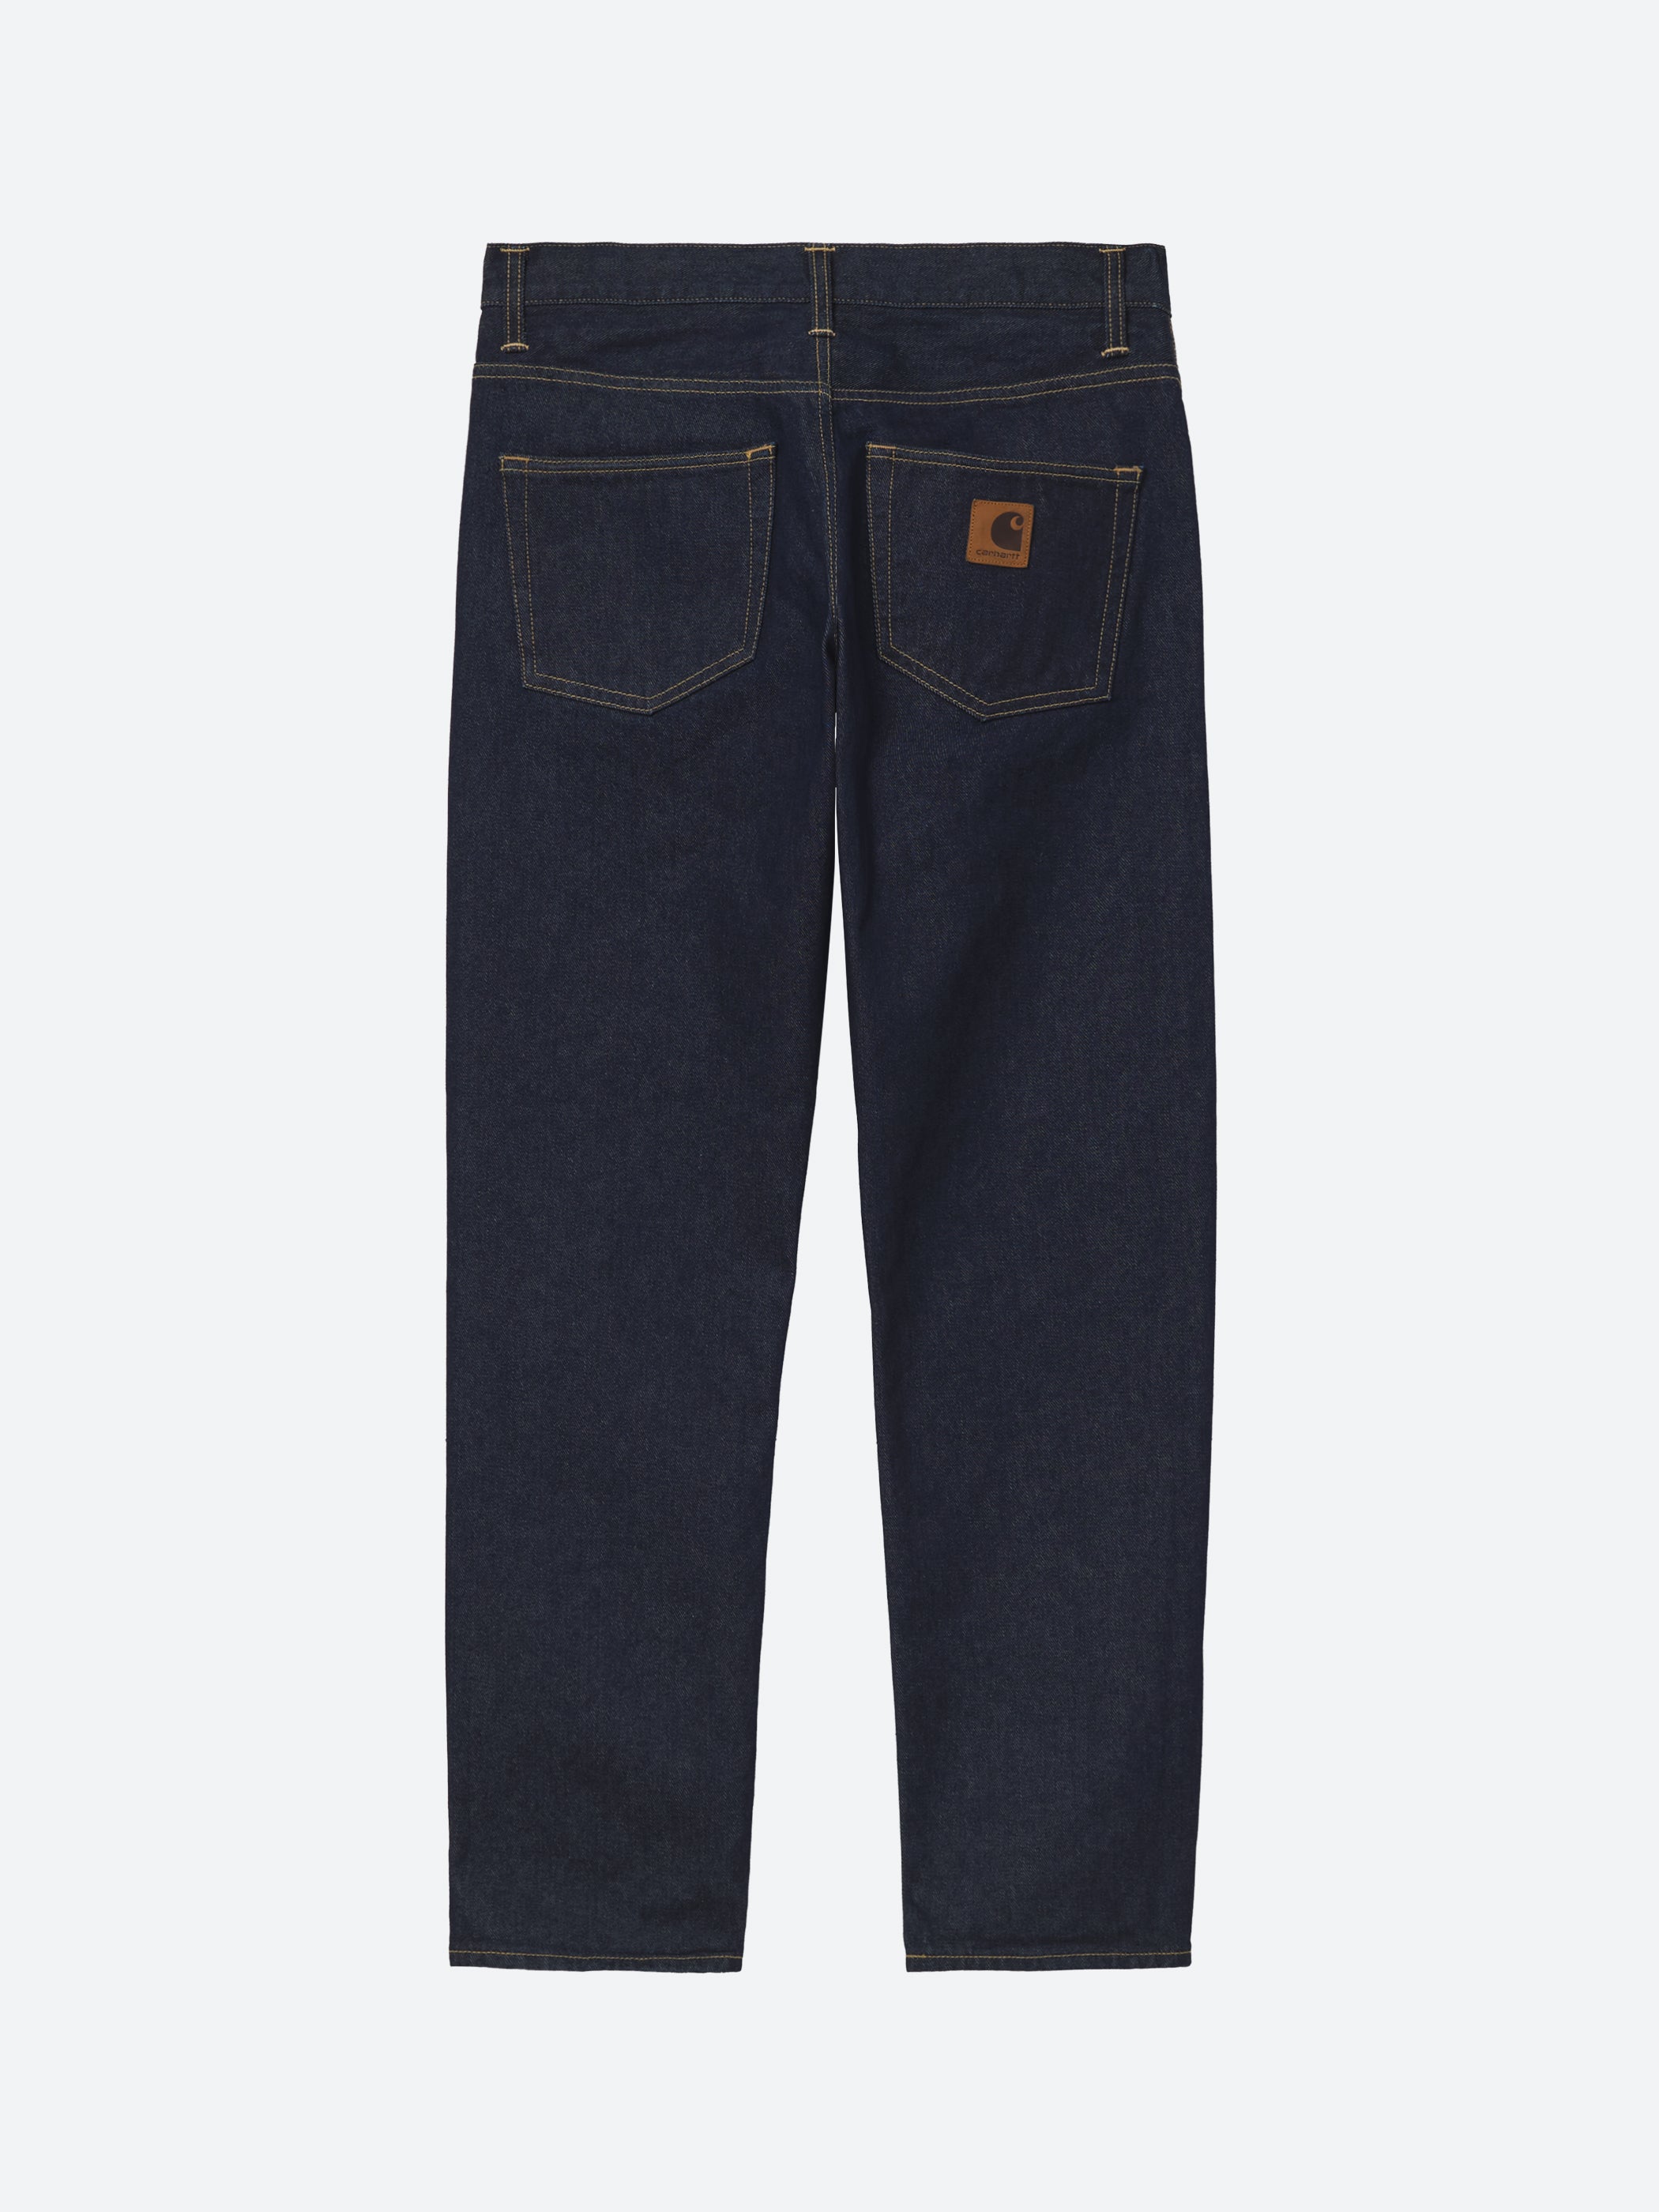 Carhartt Men's Tapered-Leg Straight/Traditional-Fit Jean - Traditions  Clothing & Gift Shop